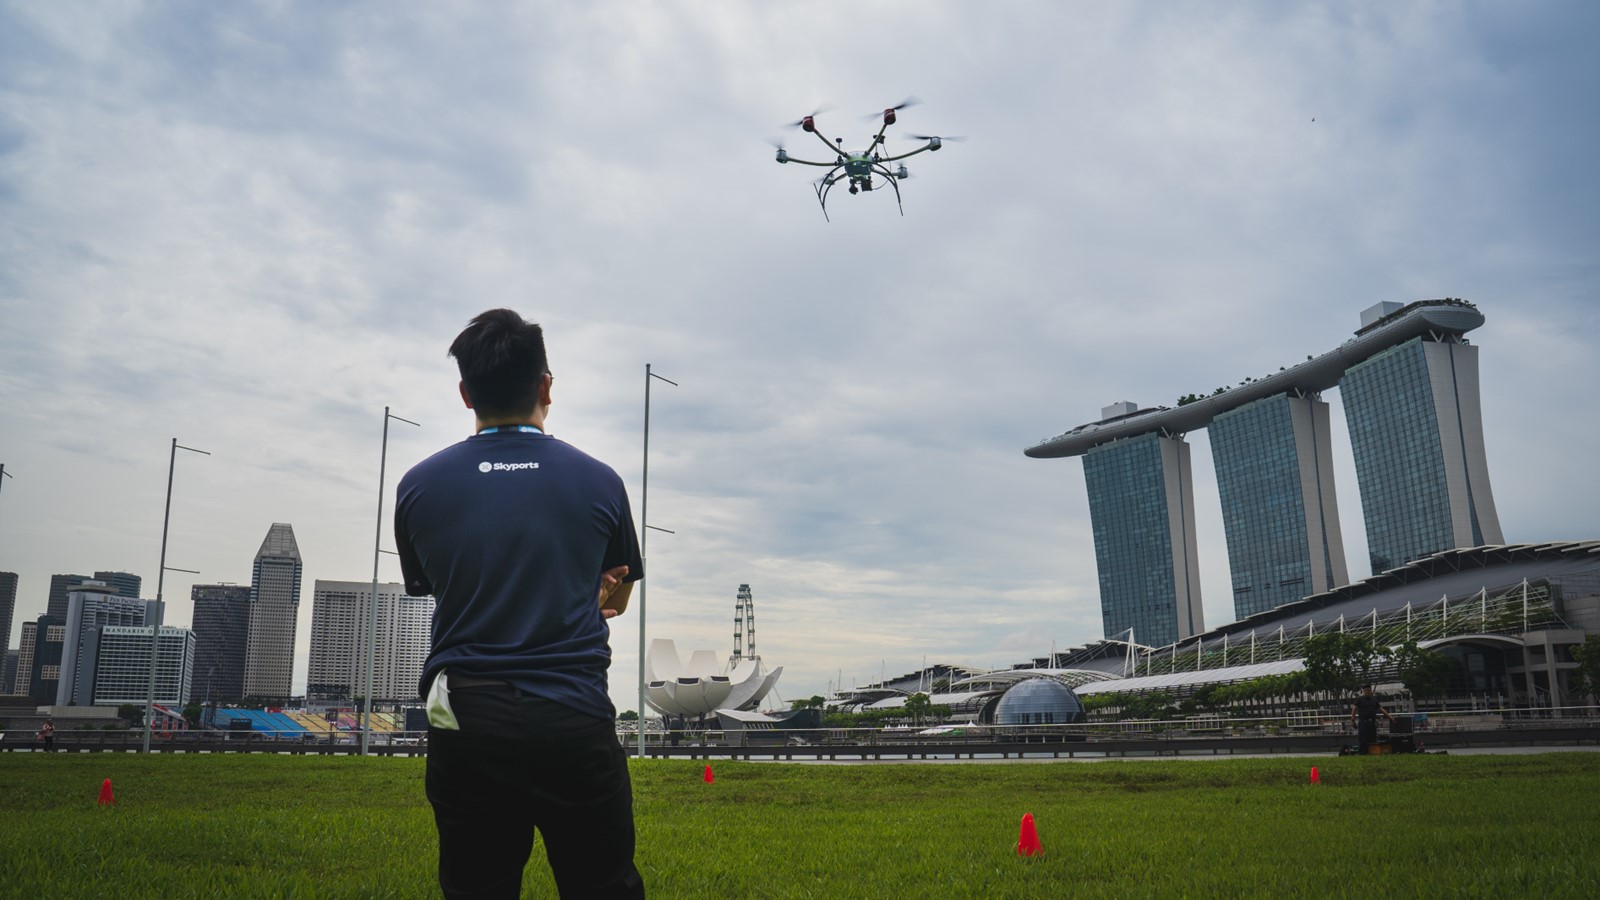 A Skyports employee operating a drone flight